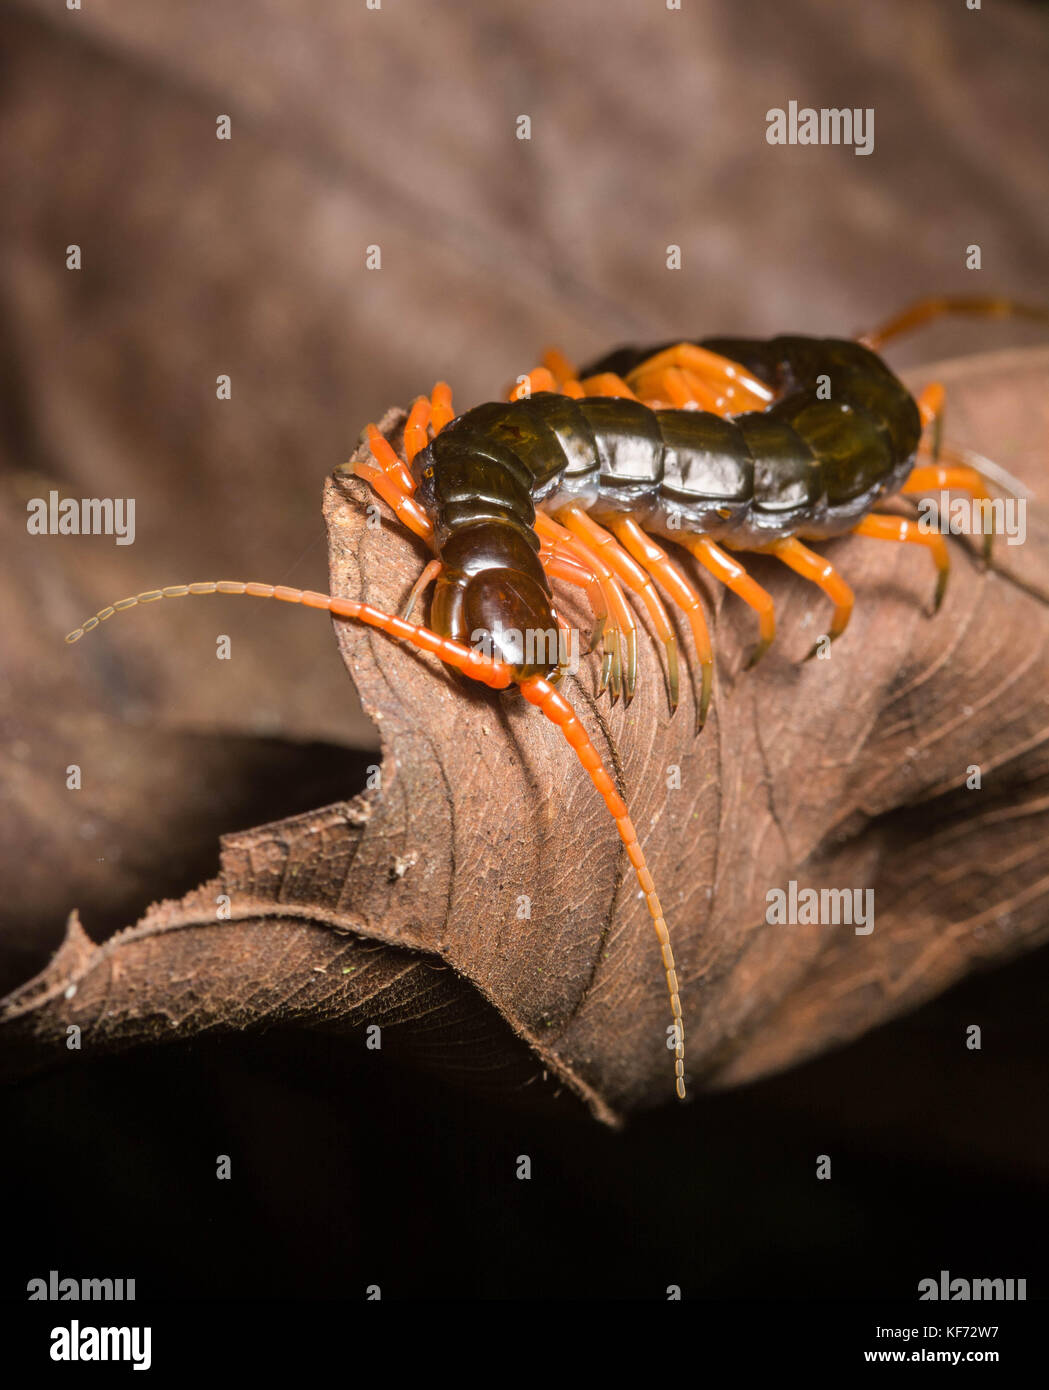 A large tropical centipede in ambush position on a leaf waiting for some prey to venture nearby. Stock Photo